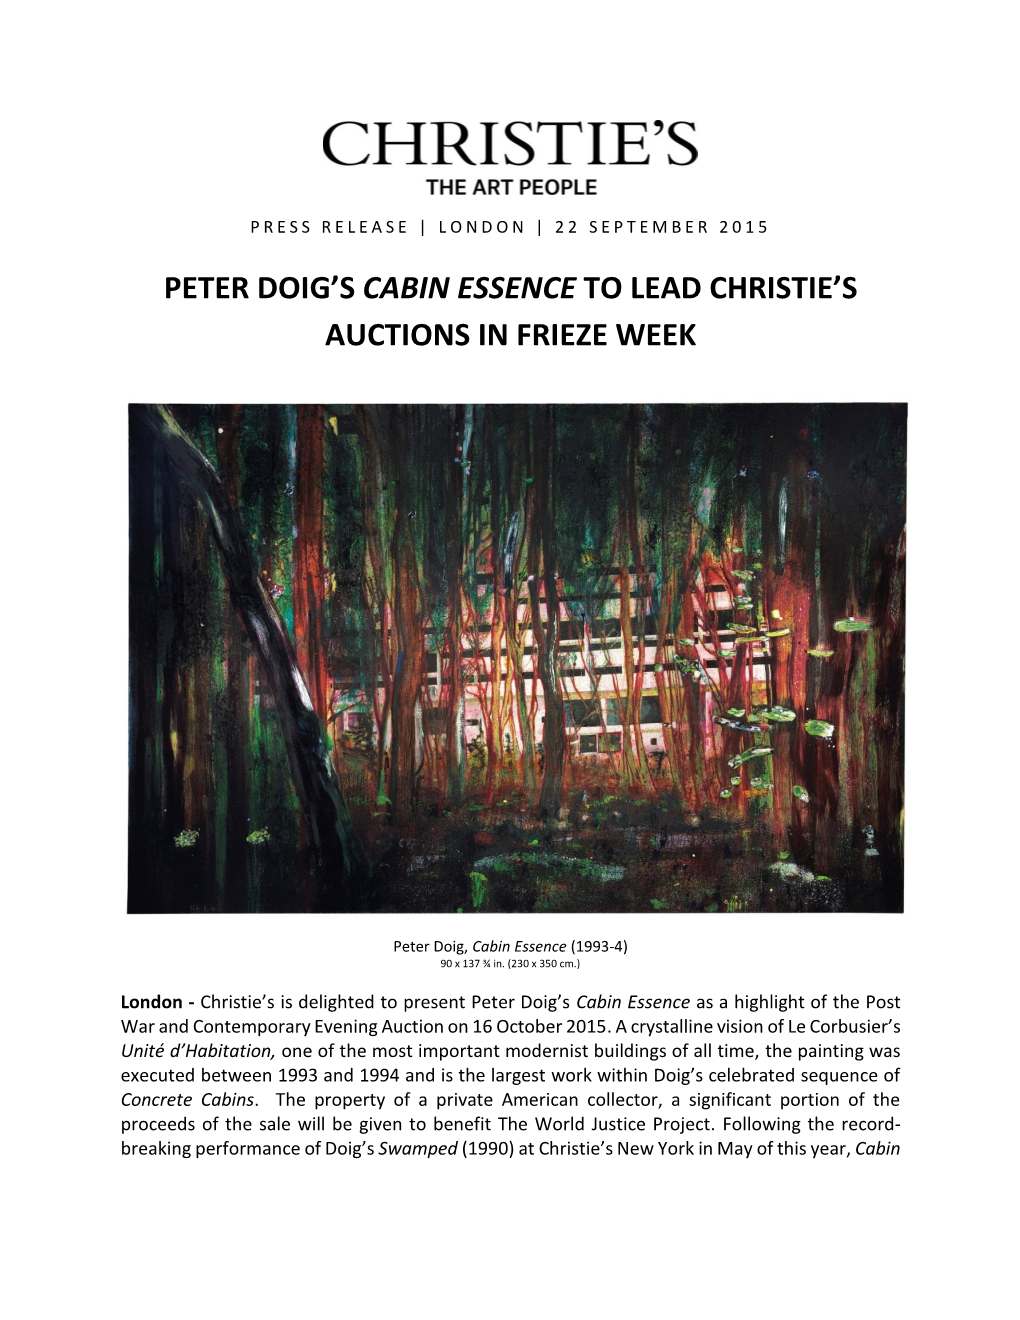 Peter Doig's Cabin Essence to Lead Christie's Auctions In